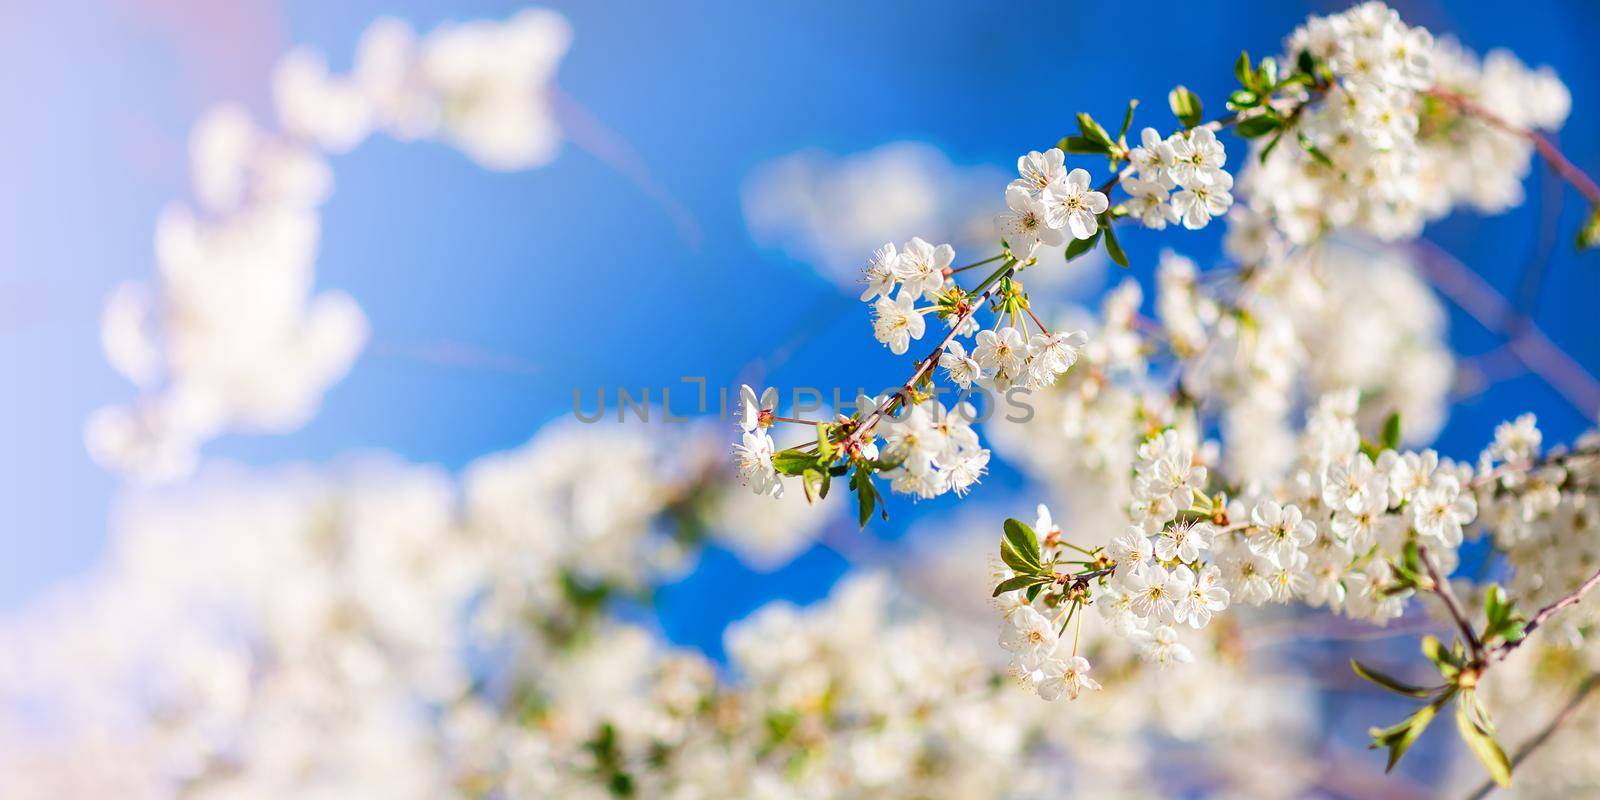 Spring blooming and blossoming flower branch against blue sky by Len44ik